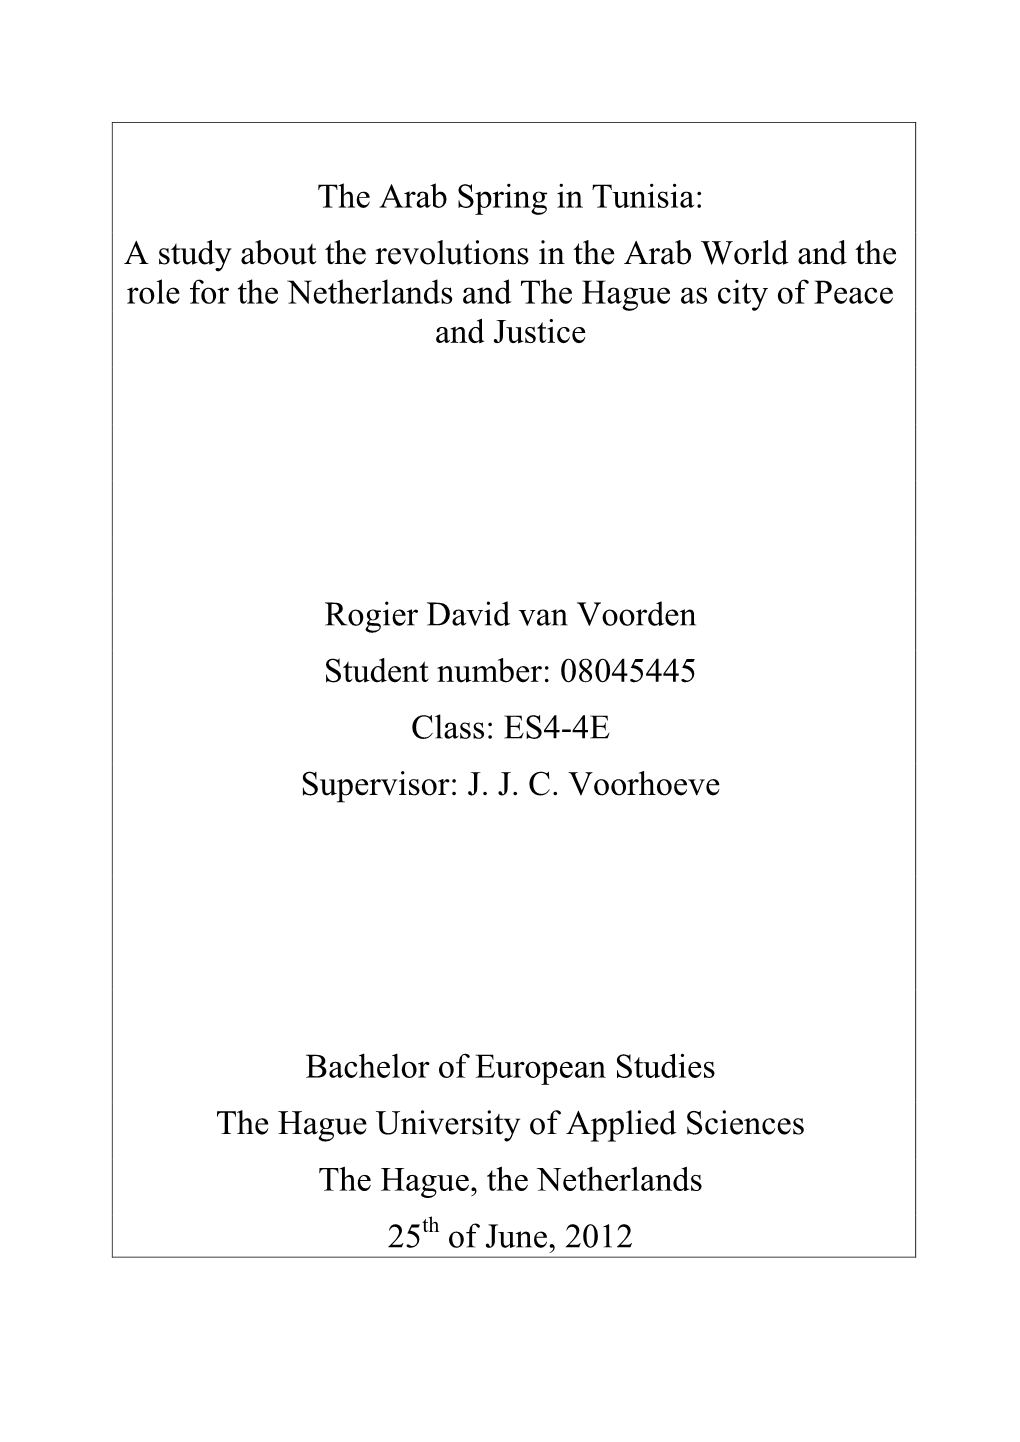 The Arab Spring in Tunisia: a Study About the Revolutions in the Arab World and the Role for the Netherlands and the Hague As City of Peace and Justice